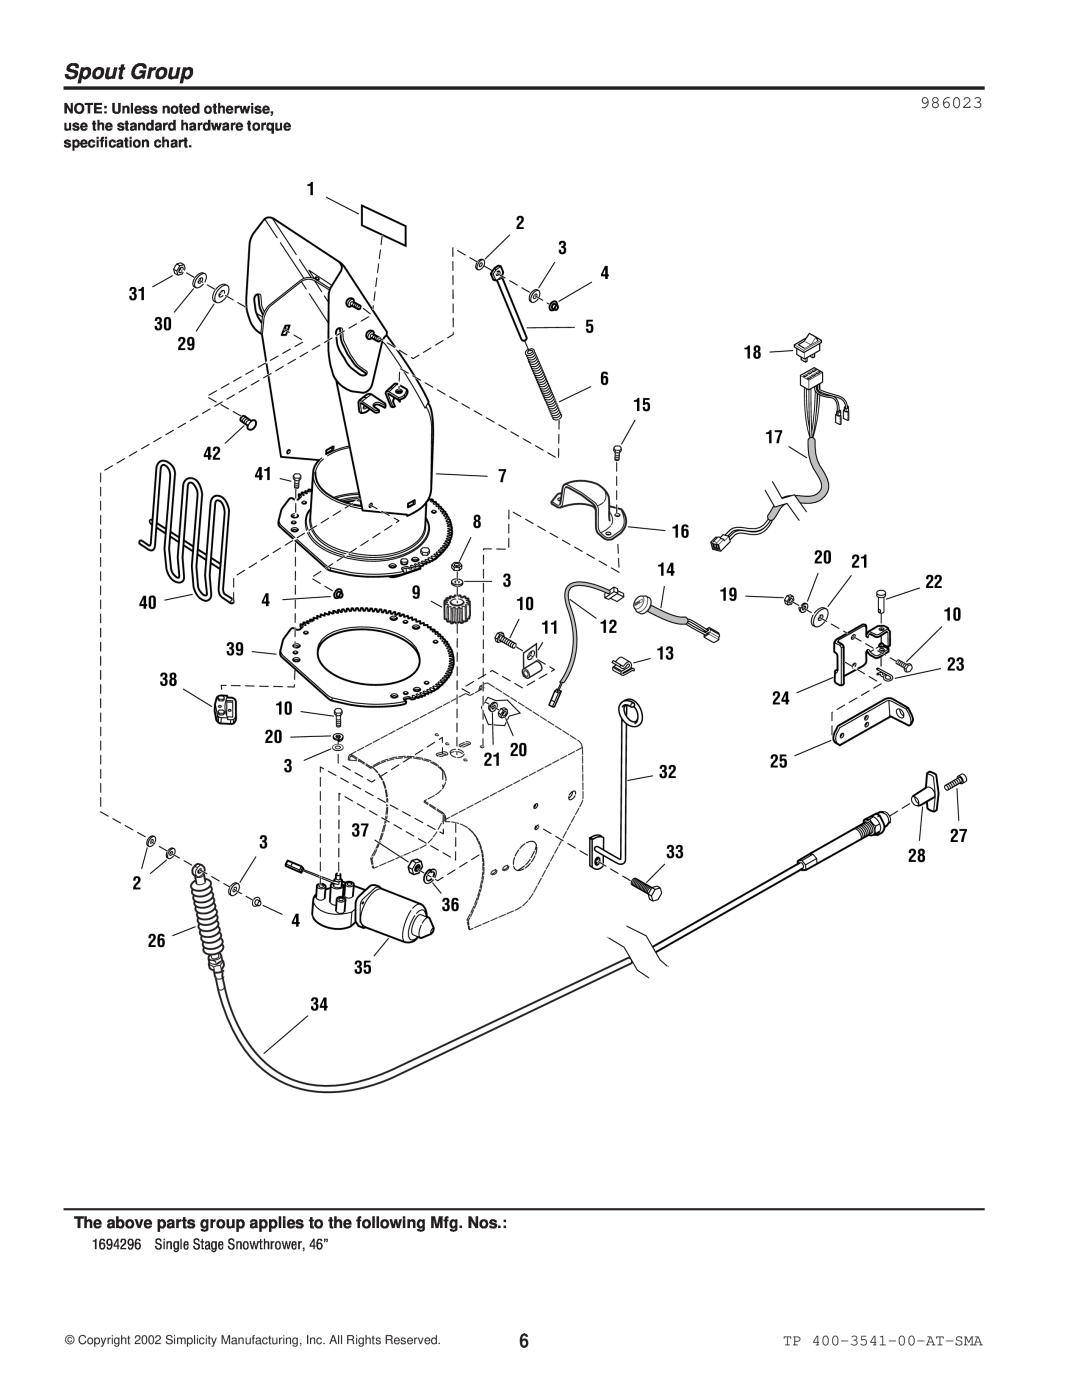 Simplicity 1694296 Spout Group, 986023, The above parts group applies to the following Mfg. Nos, TP 400-3541-00-AT-SMA 